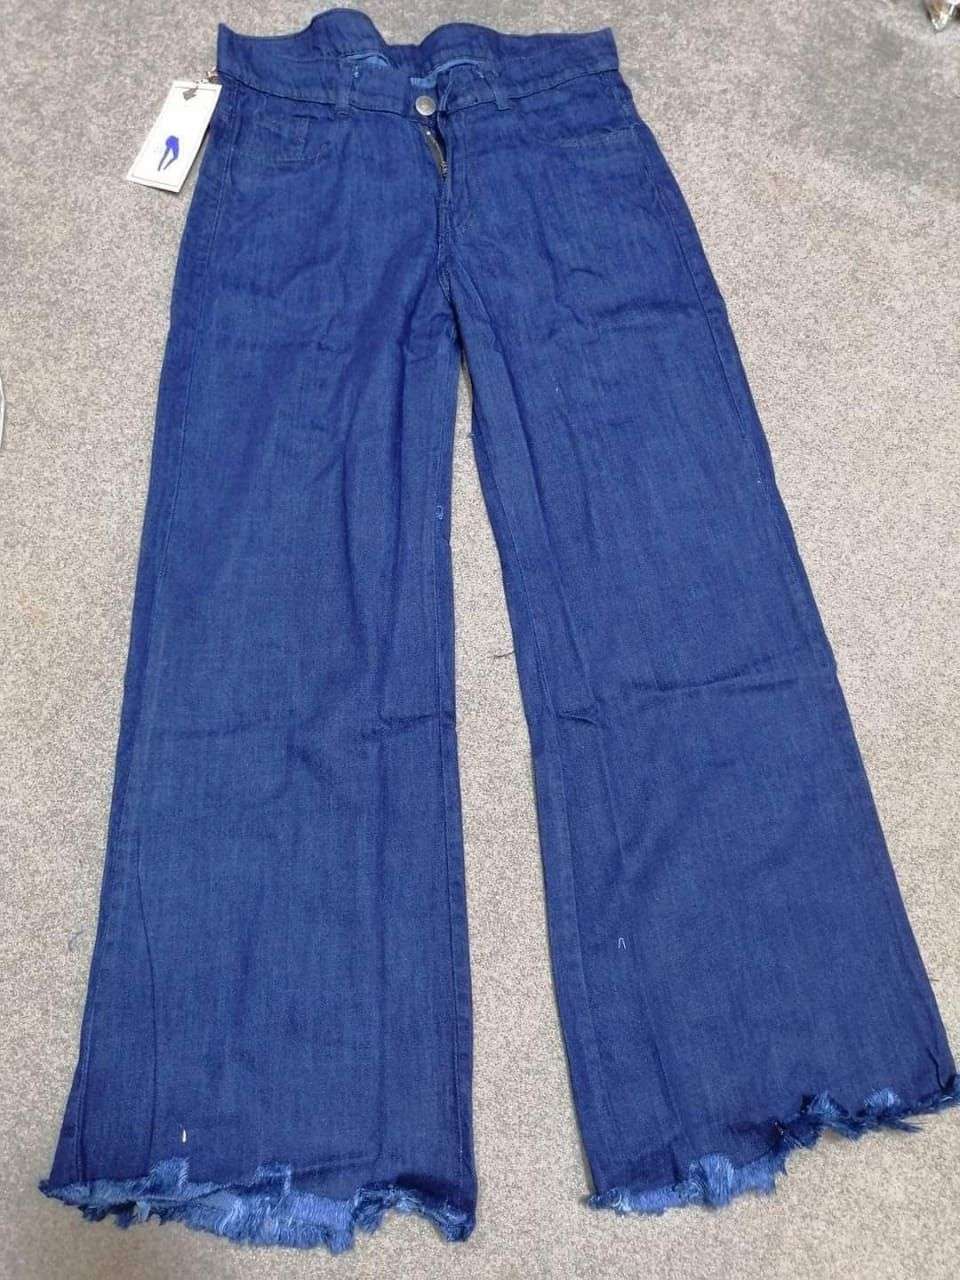 Ladies` jeans trousers Color navy - RESERVED - WG788-59J